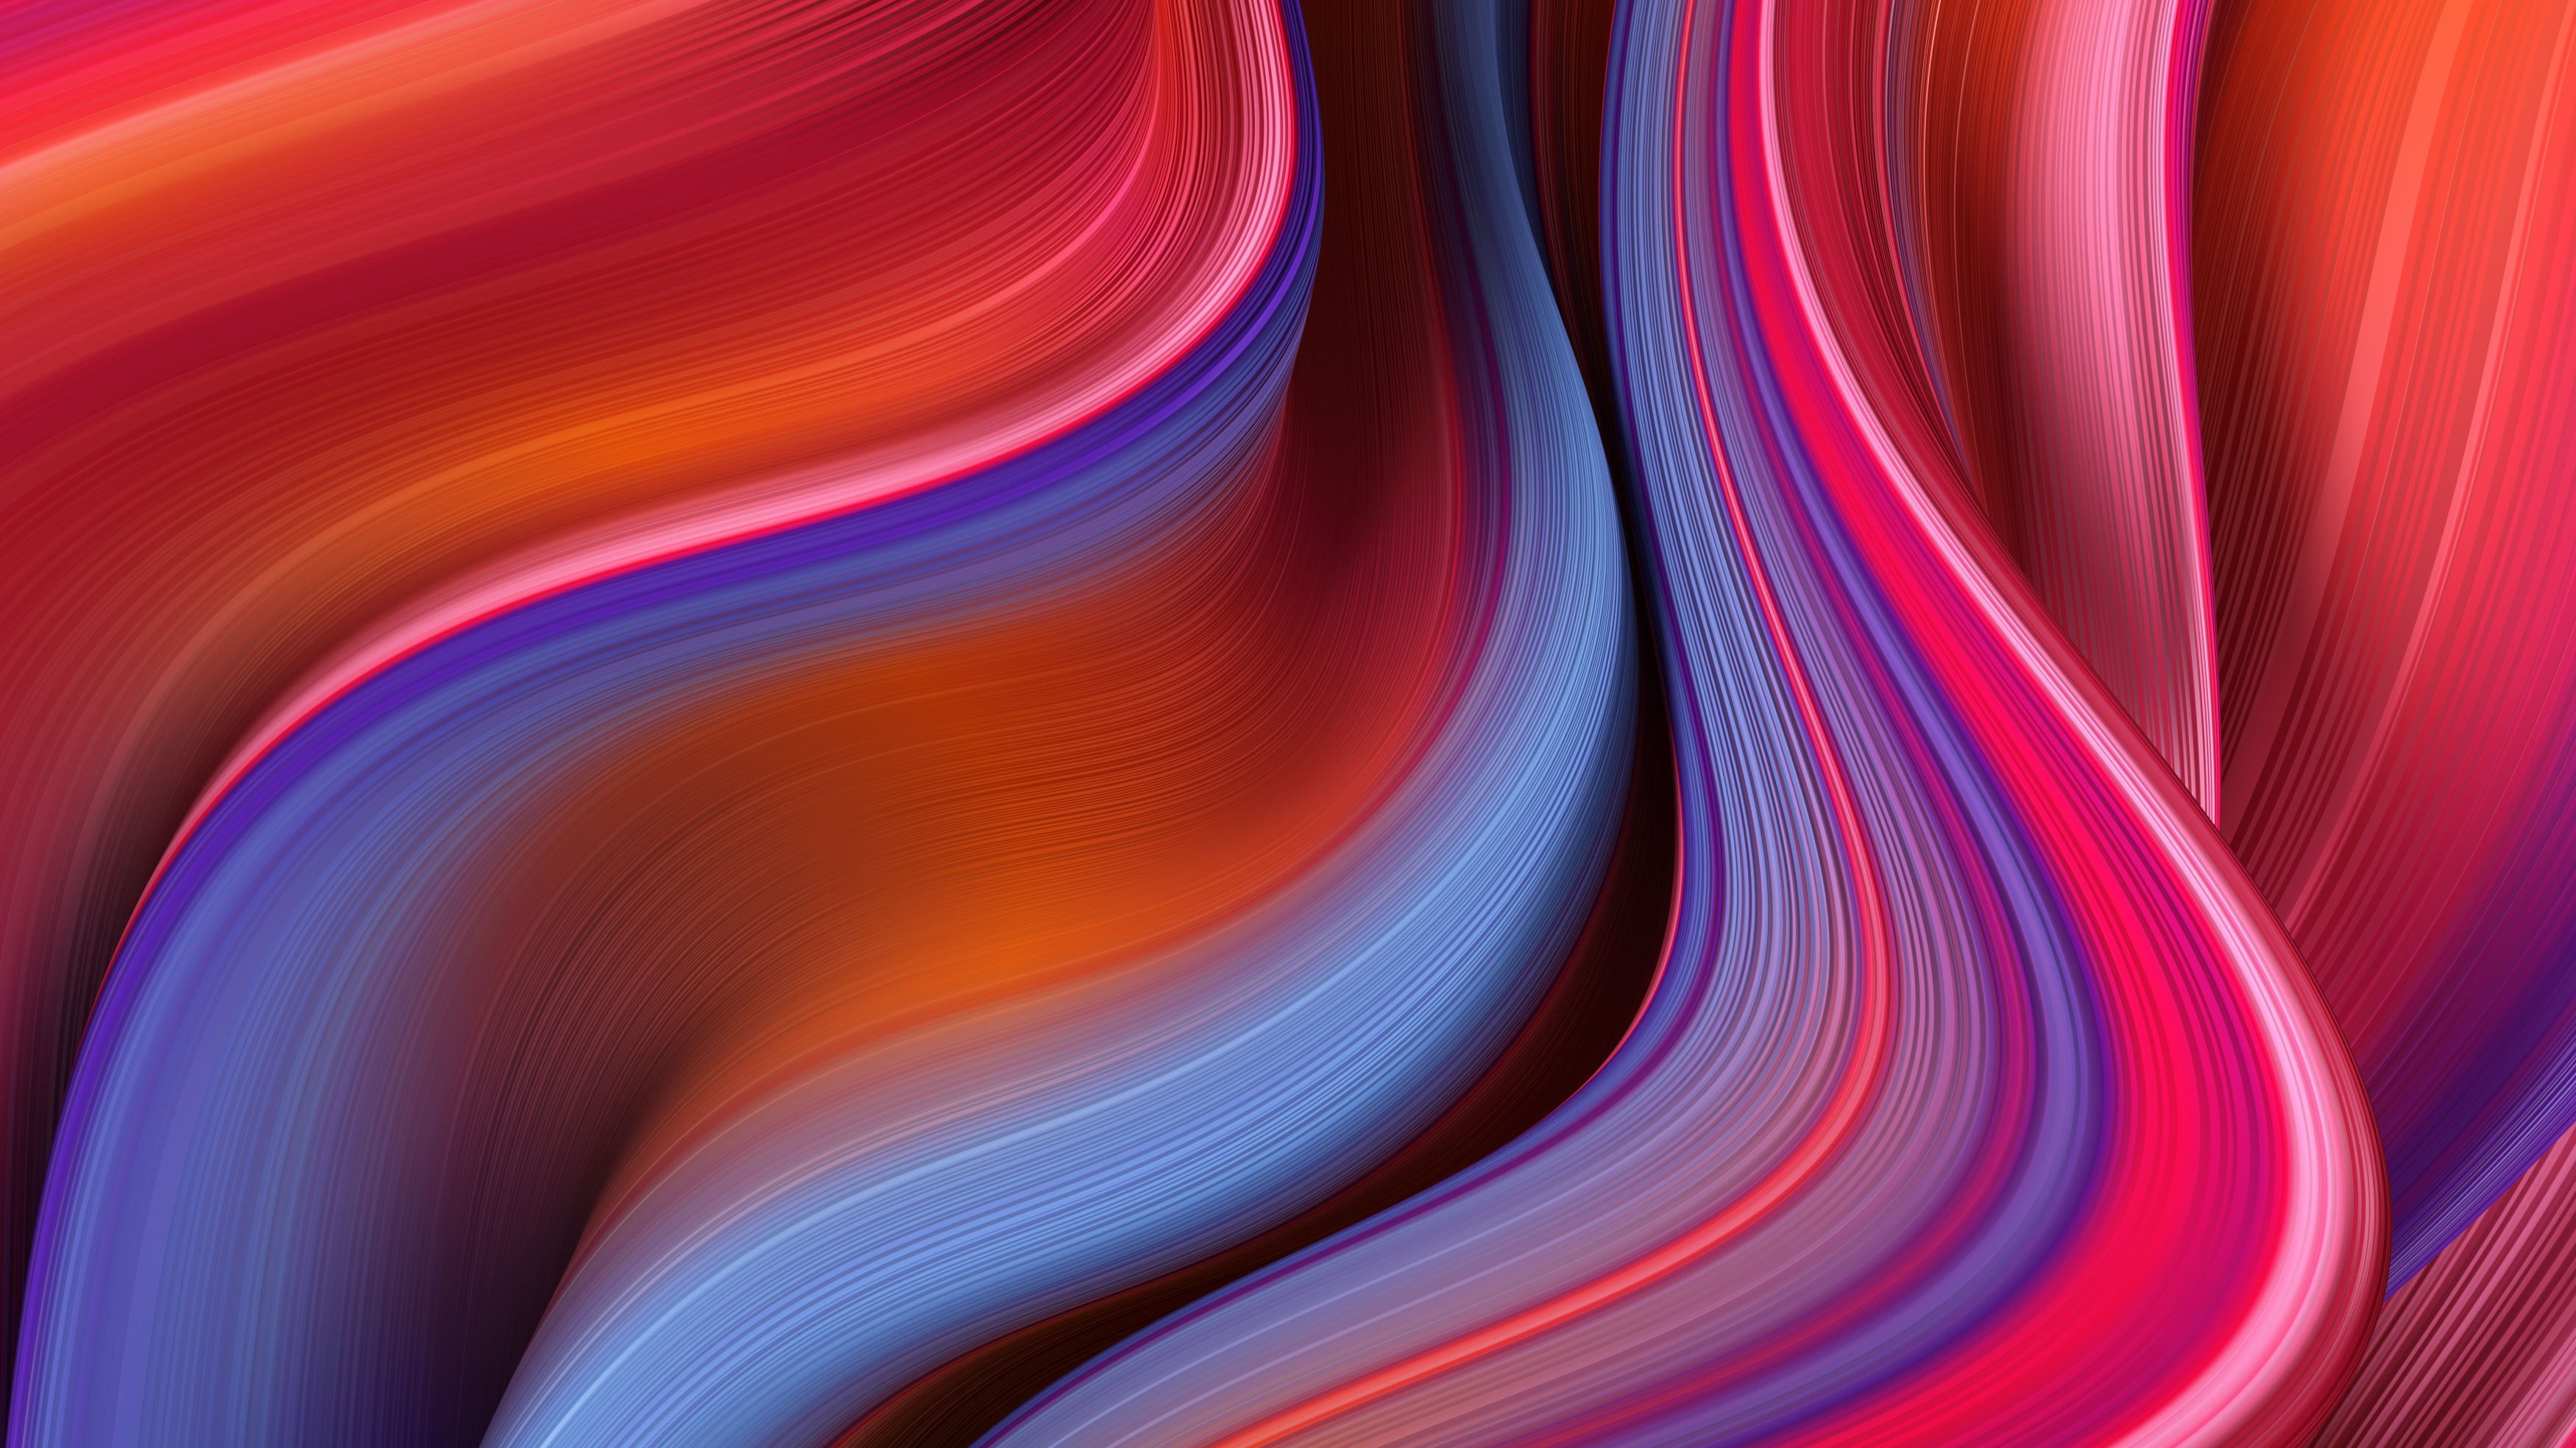 4k Abstract Art Wallpaper,HD Abstract Wallpapers,4k Wallpapers,Images